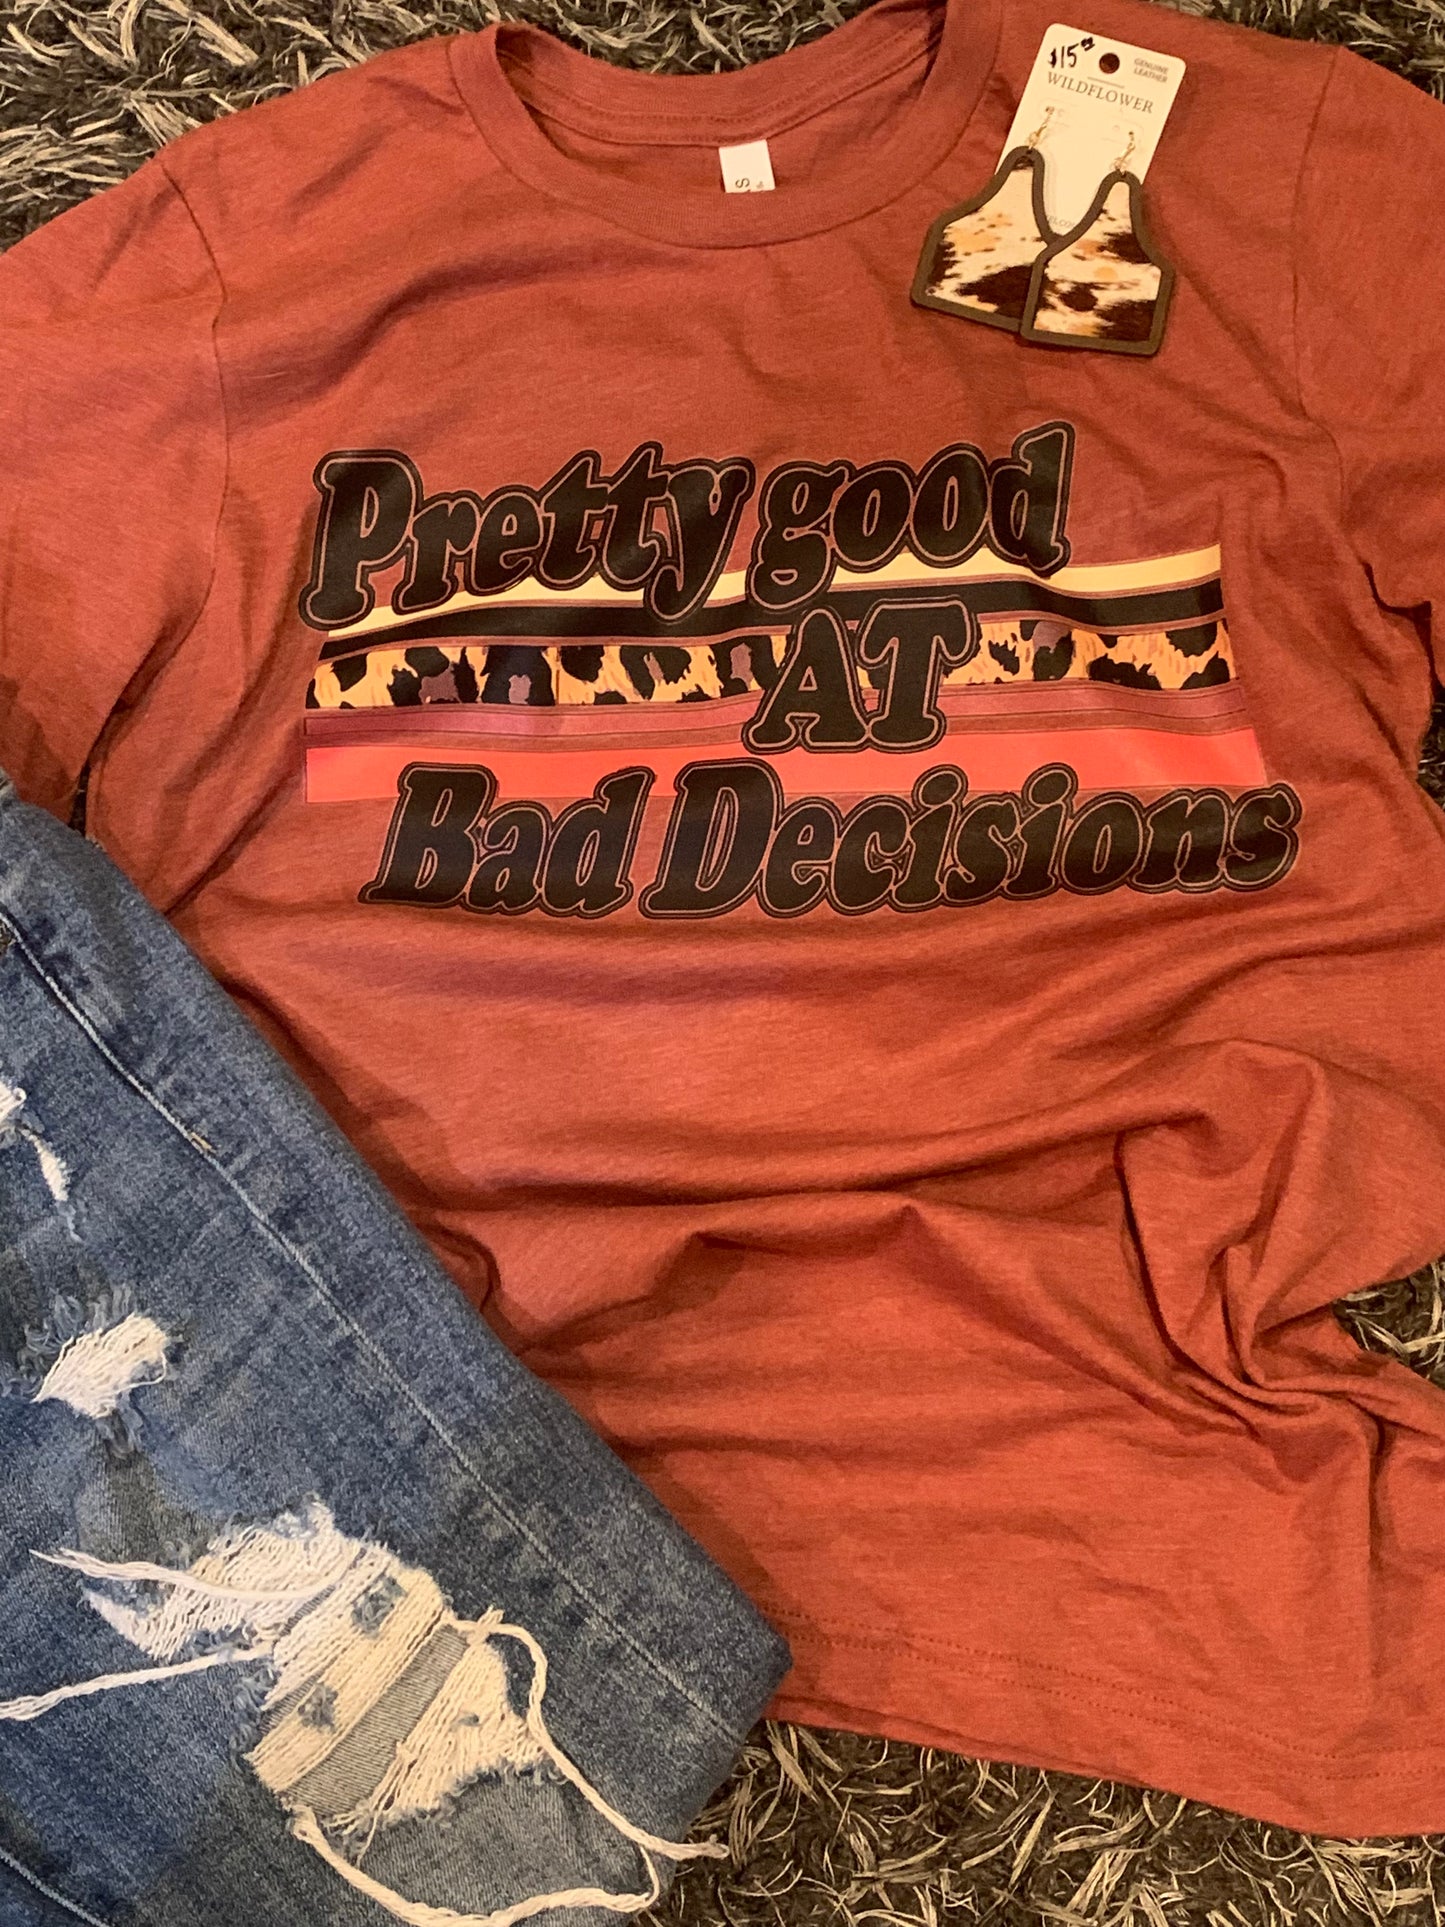 Pretty Good at Bad Decisions Graphic Tee